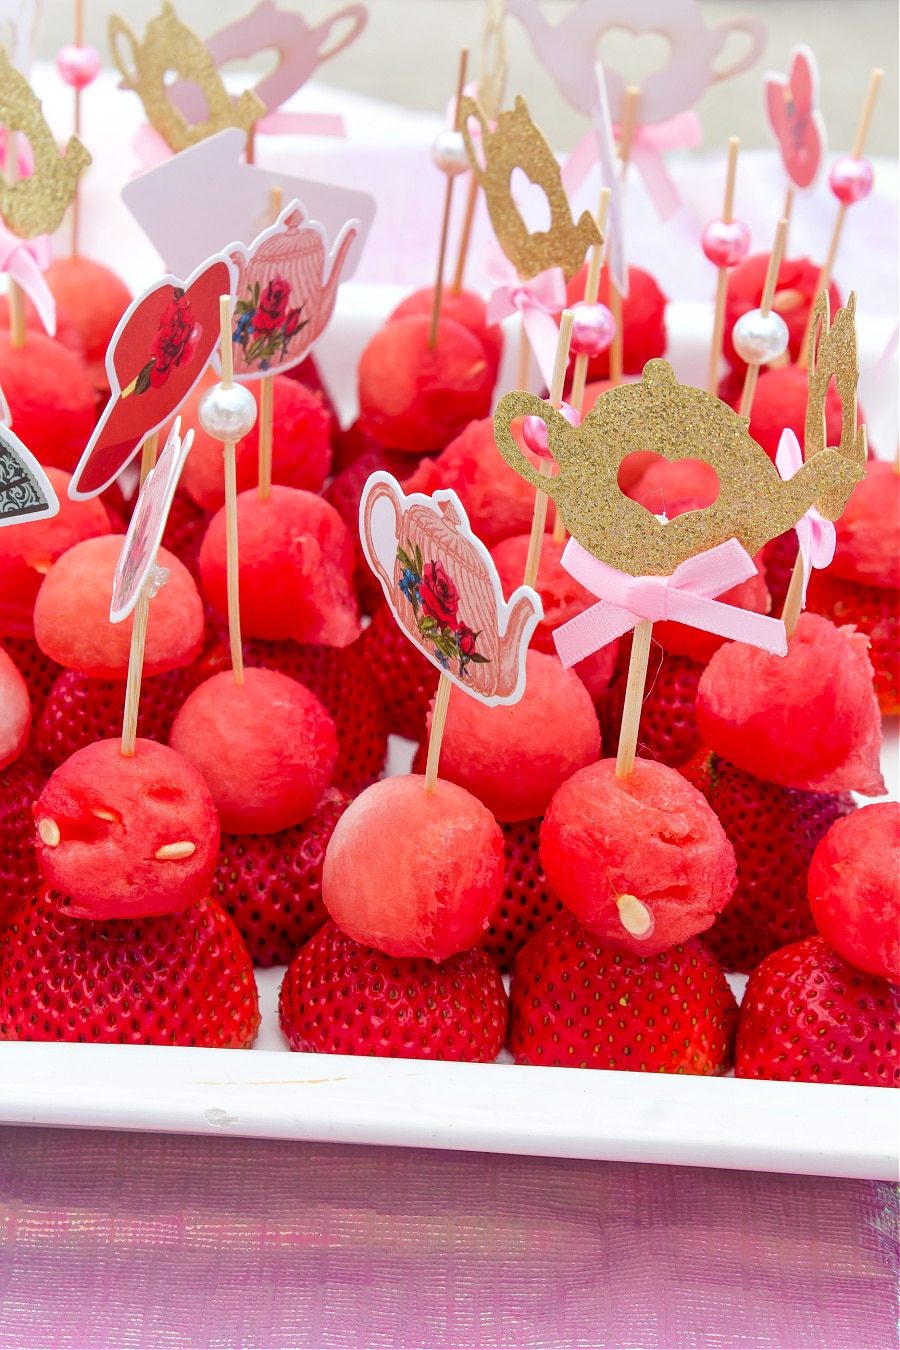 Healthy fruit party picks with watermelon balls and strawberries for a tea party.